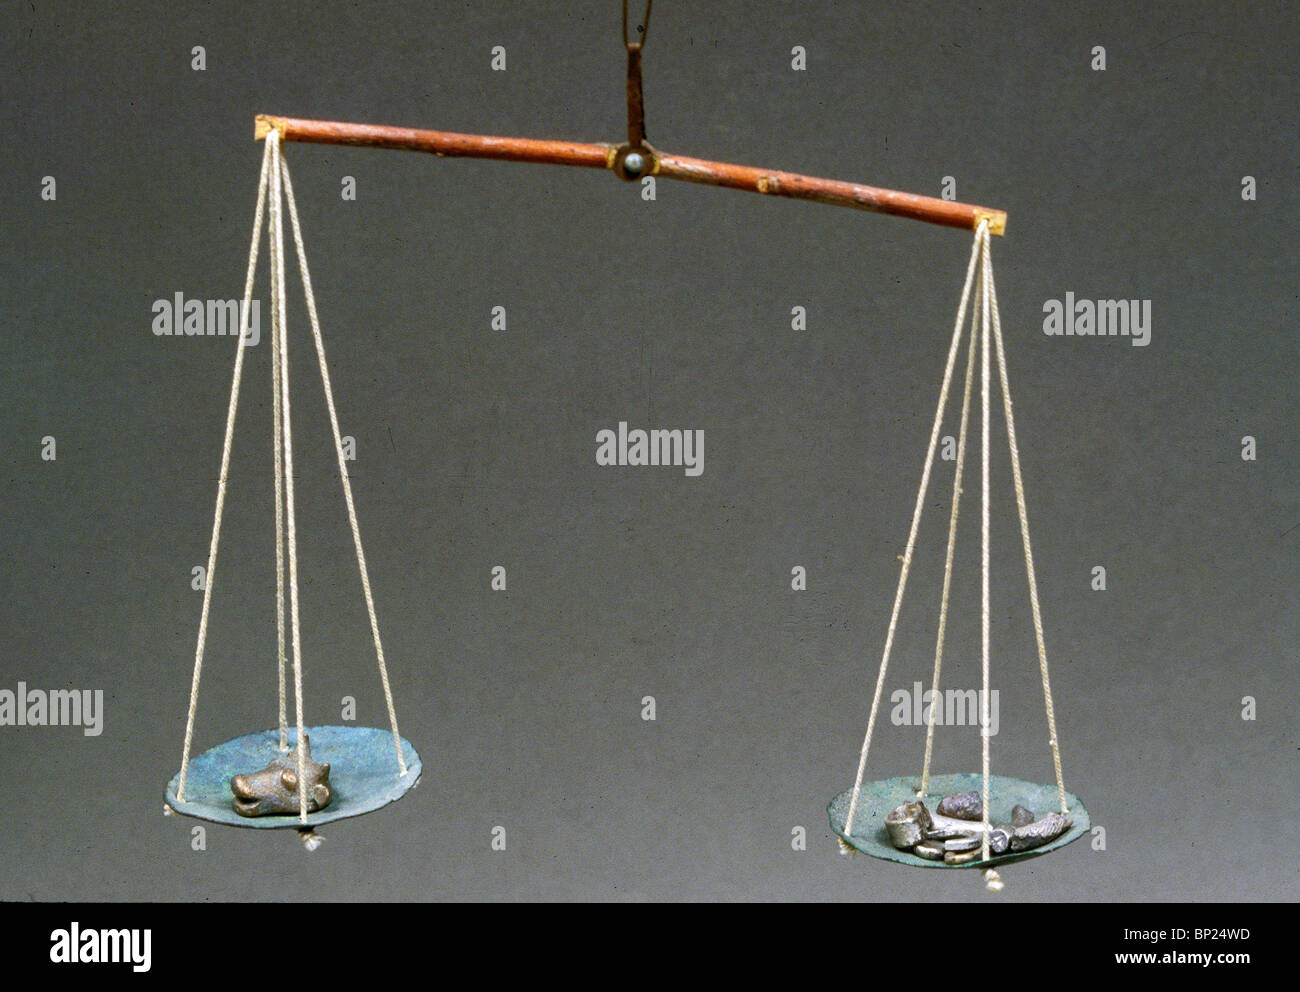 672. ROMAN PERIOD SCALE FOR WEIGHING GOLD AND SILVER, RECONSTRUCTION WITH ORIGINAL PARTS Stock Photo